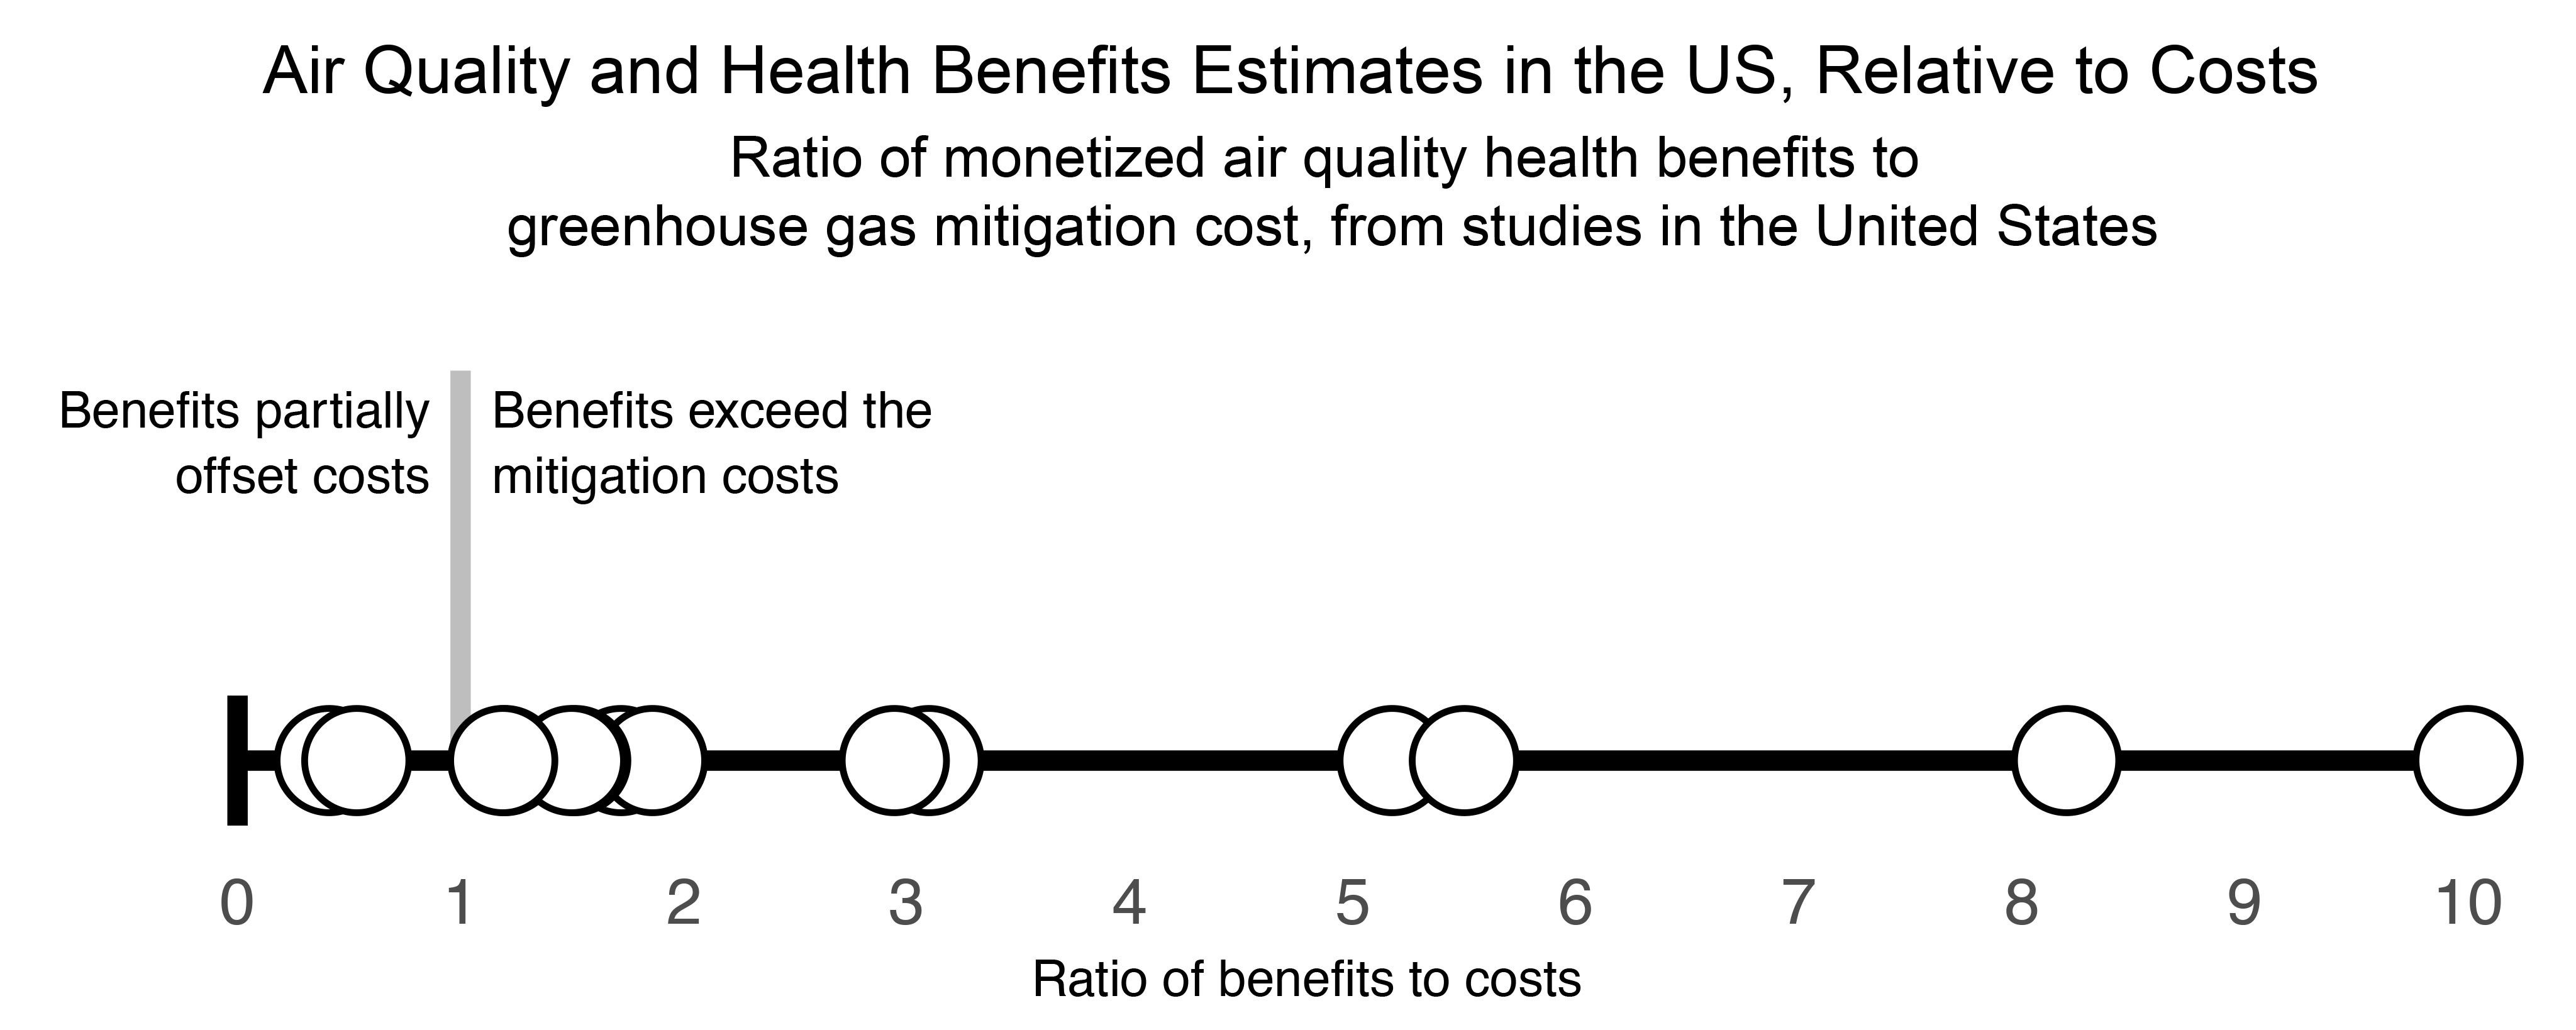 Air Quality and Health Benefits Estimates in the US, Relative to Costs